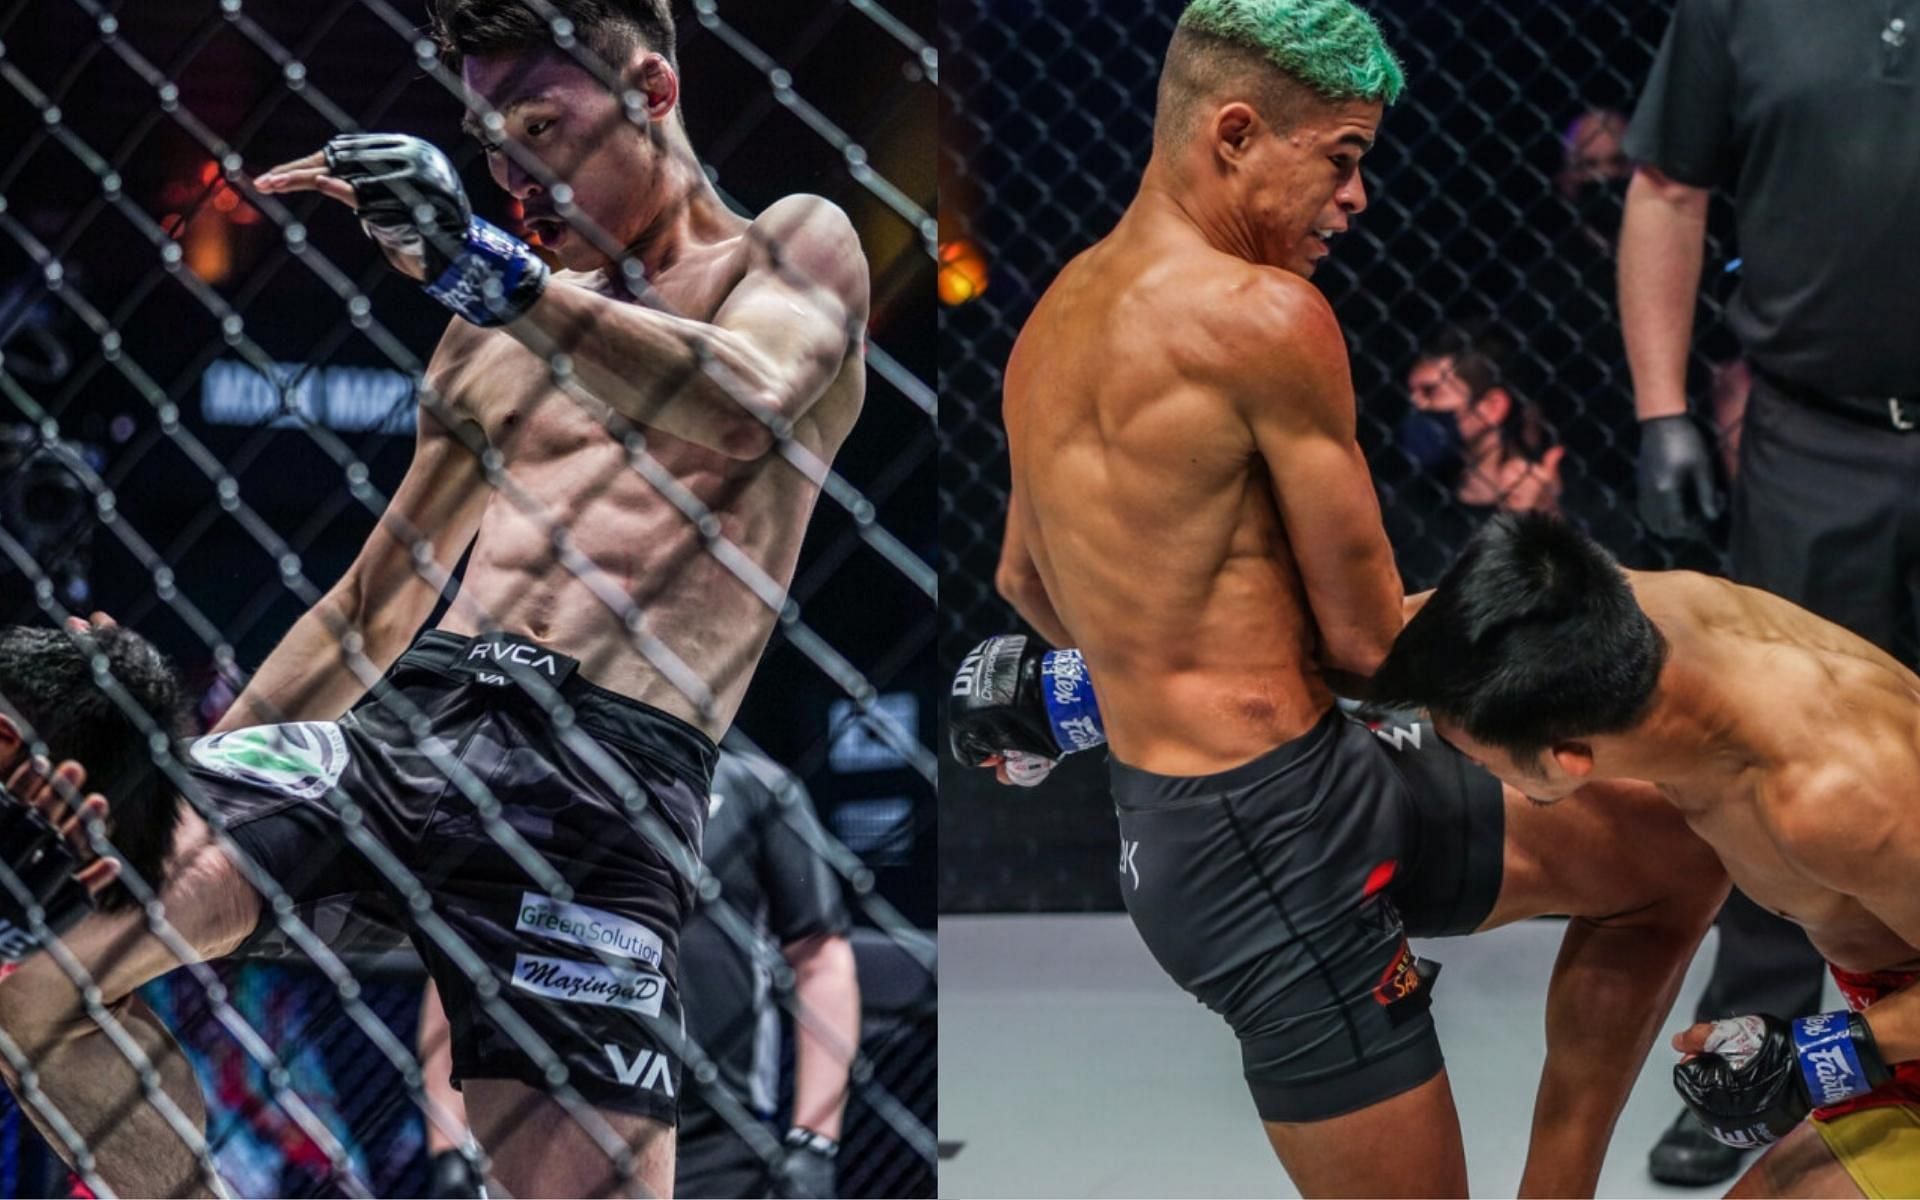 Kwon Won Il (left) and Fabricio Andrade (right) will face other in the co-main event of ONE 158. (Images courtesy of ONE Championship)